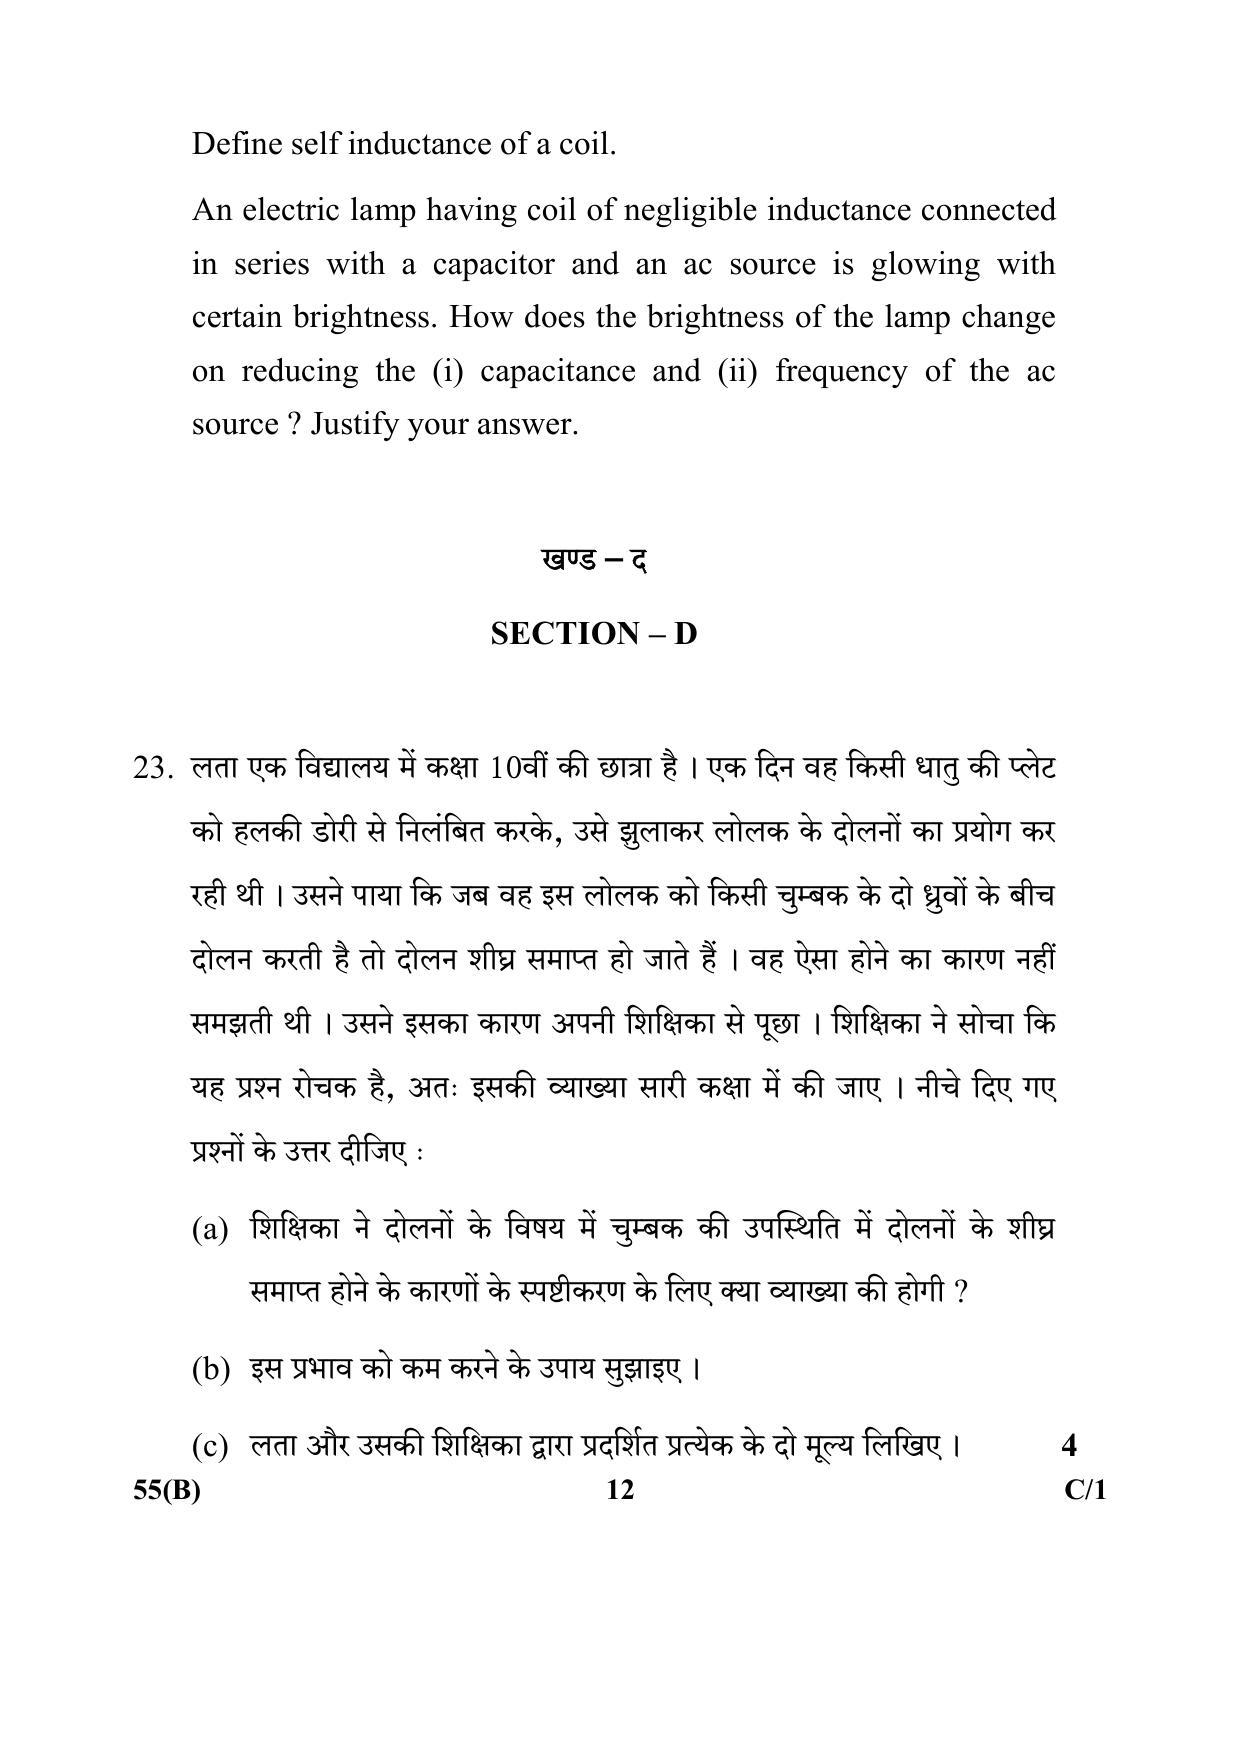 CBSE Class 12 55(B) (Physics) 2018 Compartment Question Paper - Page 12